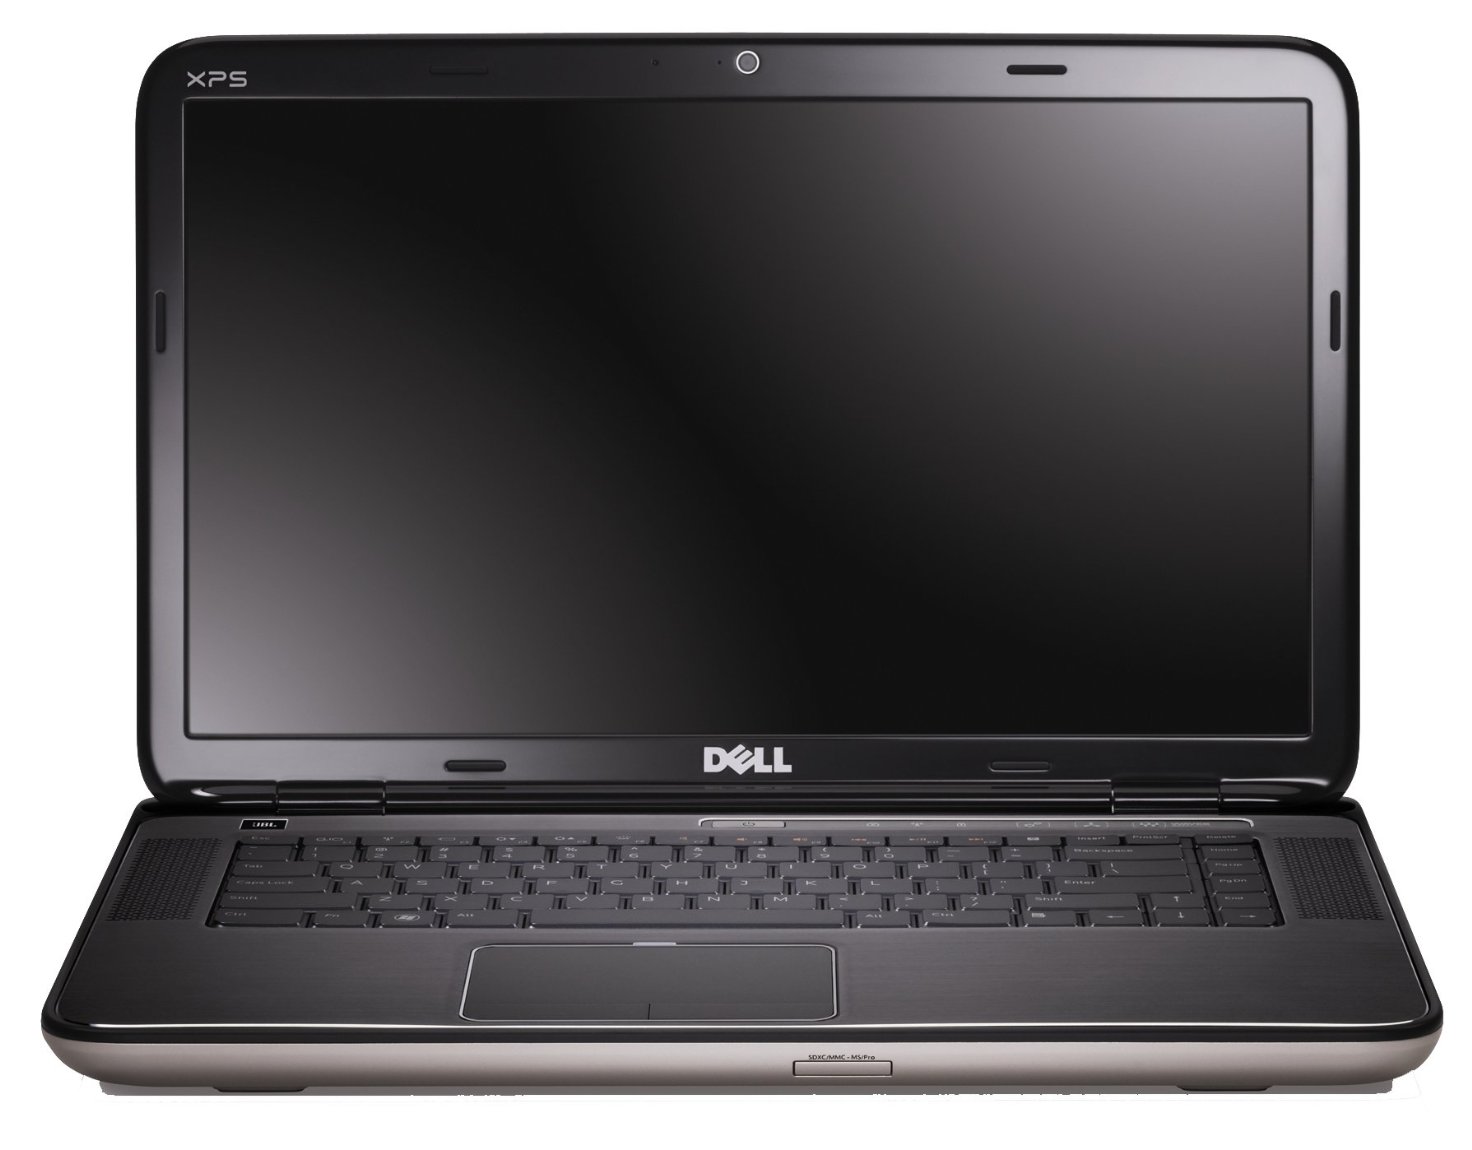   Dell XPS 15 (9570-5413)  1